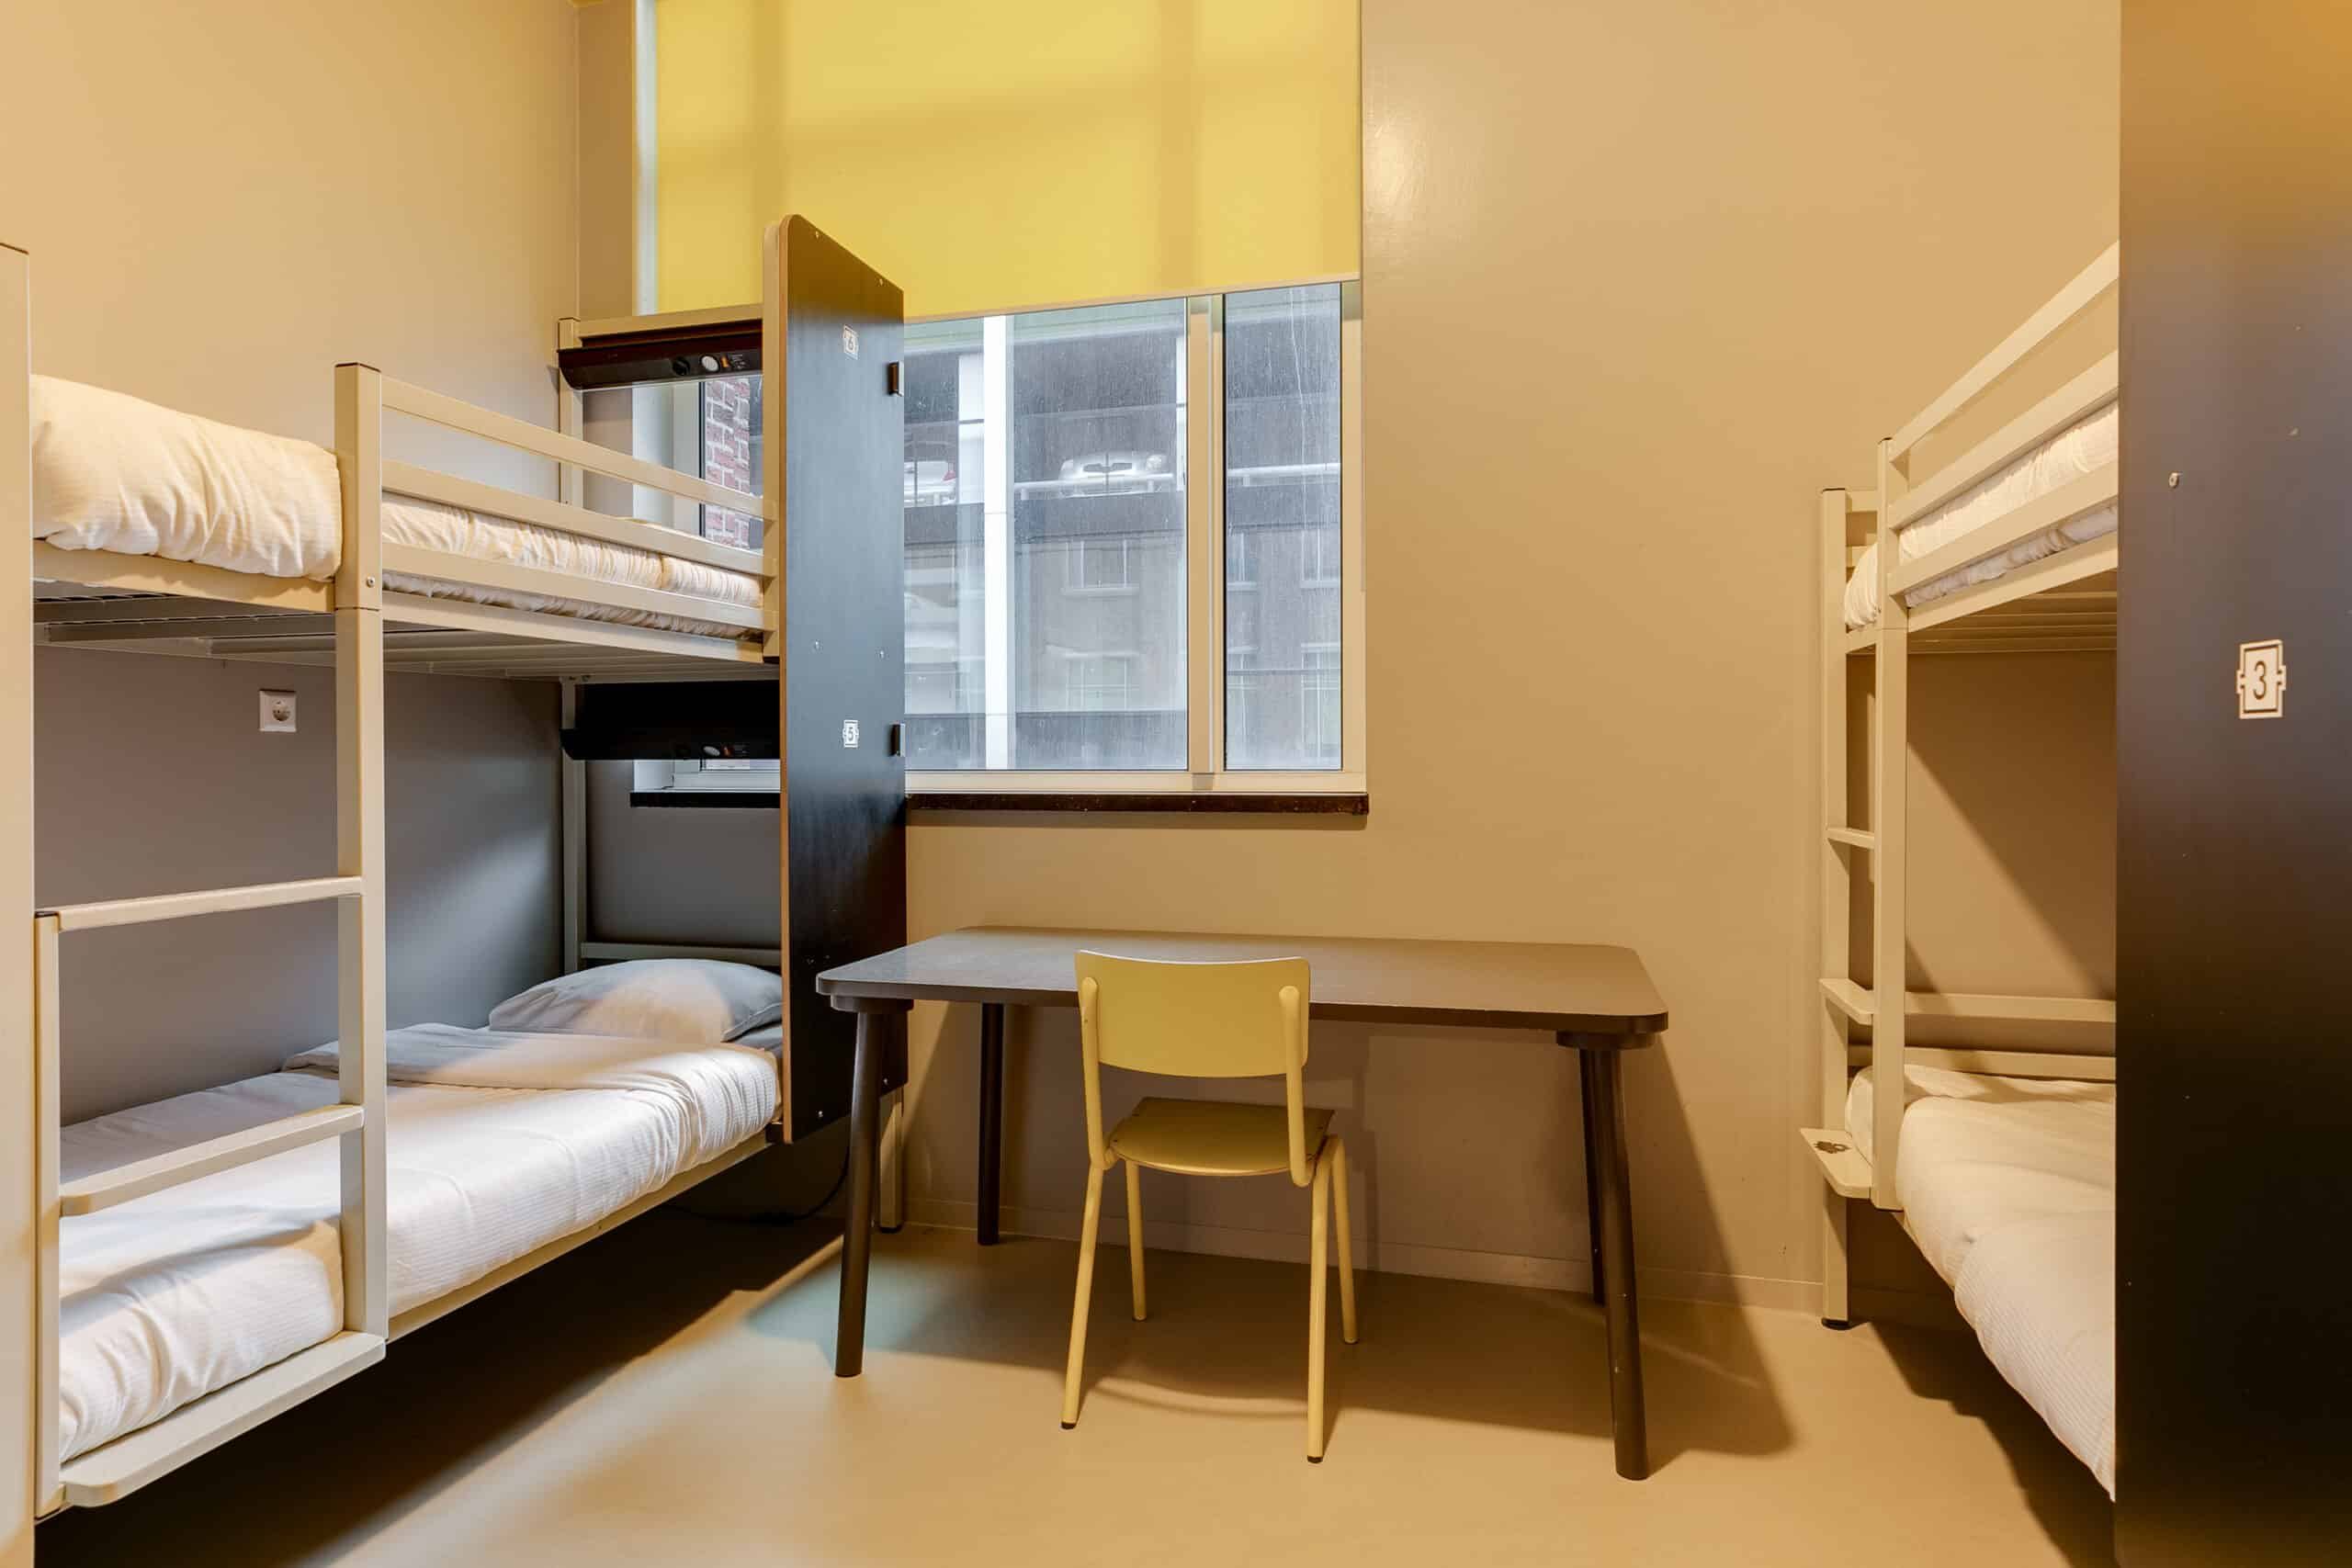 Dorm room with bunk beds at Clinknoord hostel Amsterdam